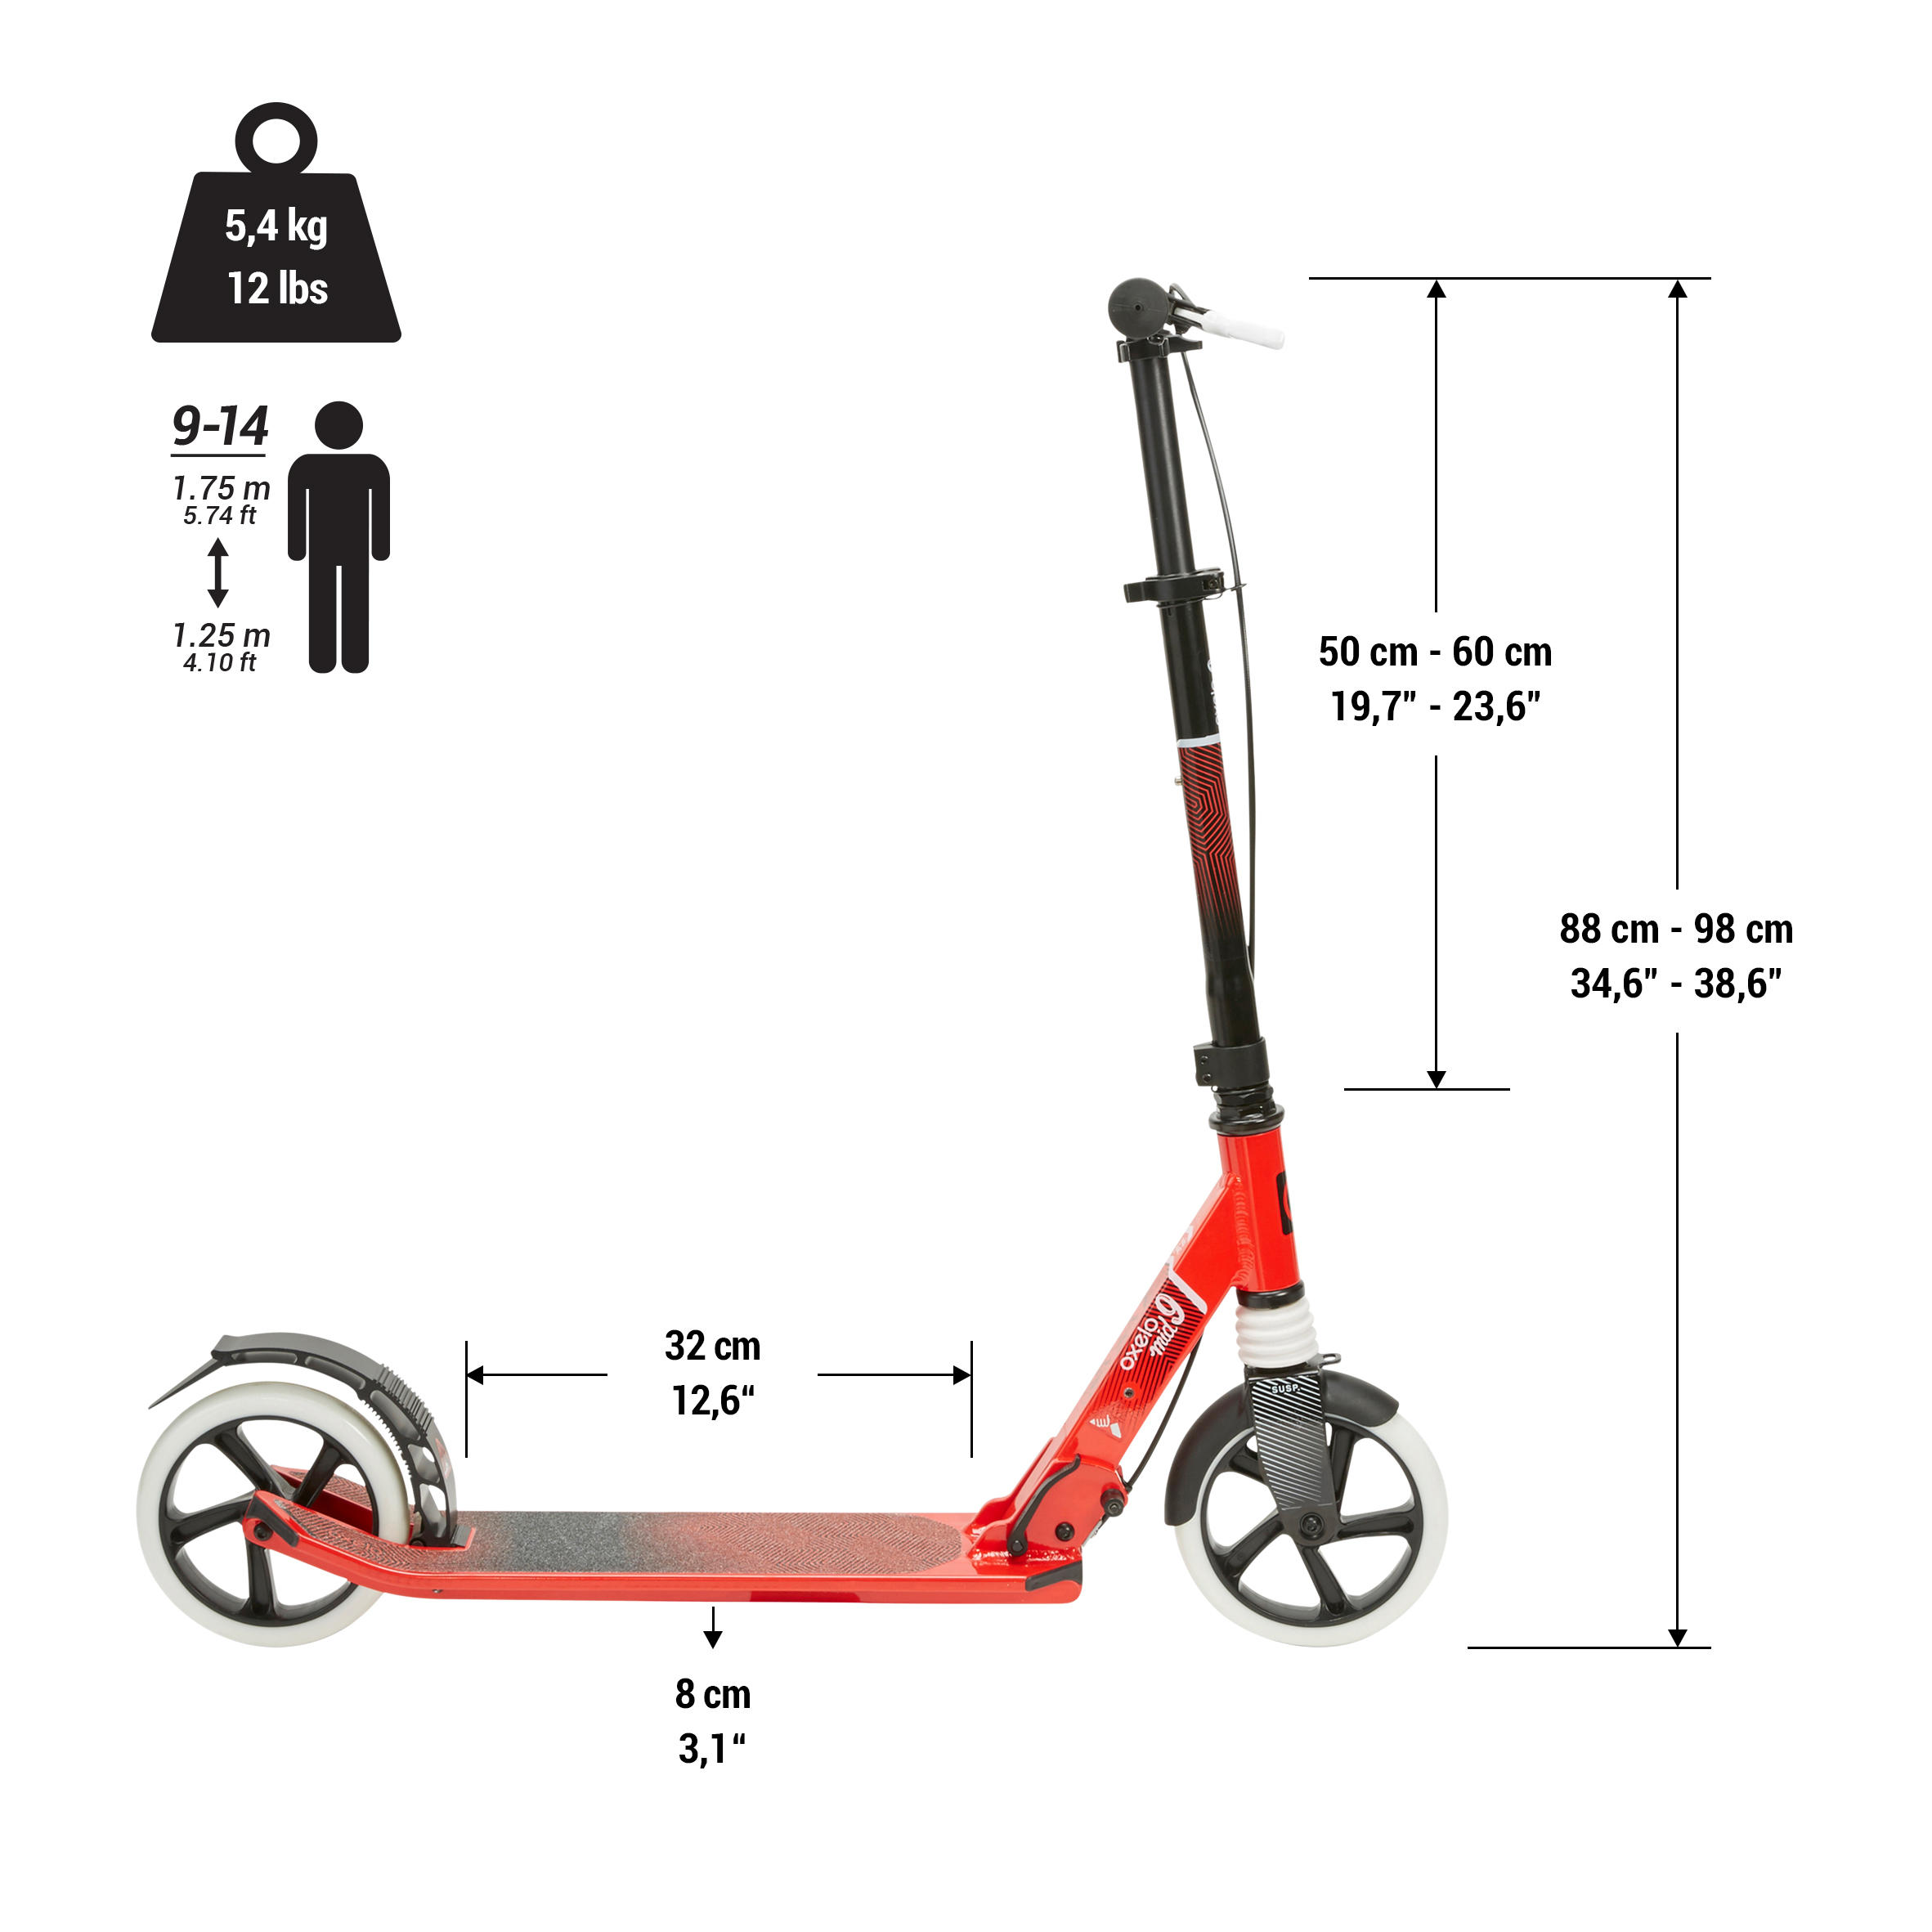 oxelo mid 9 scooter review